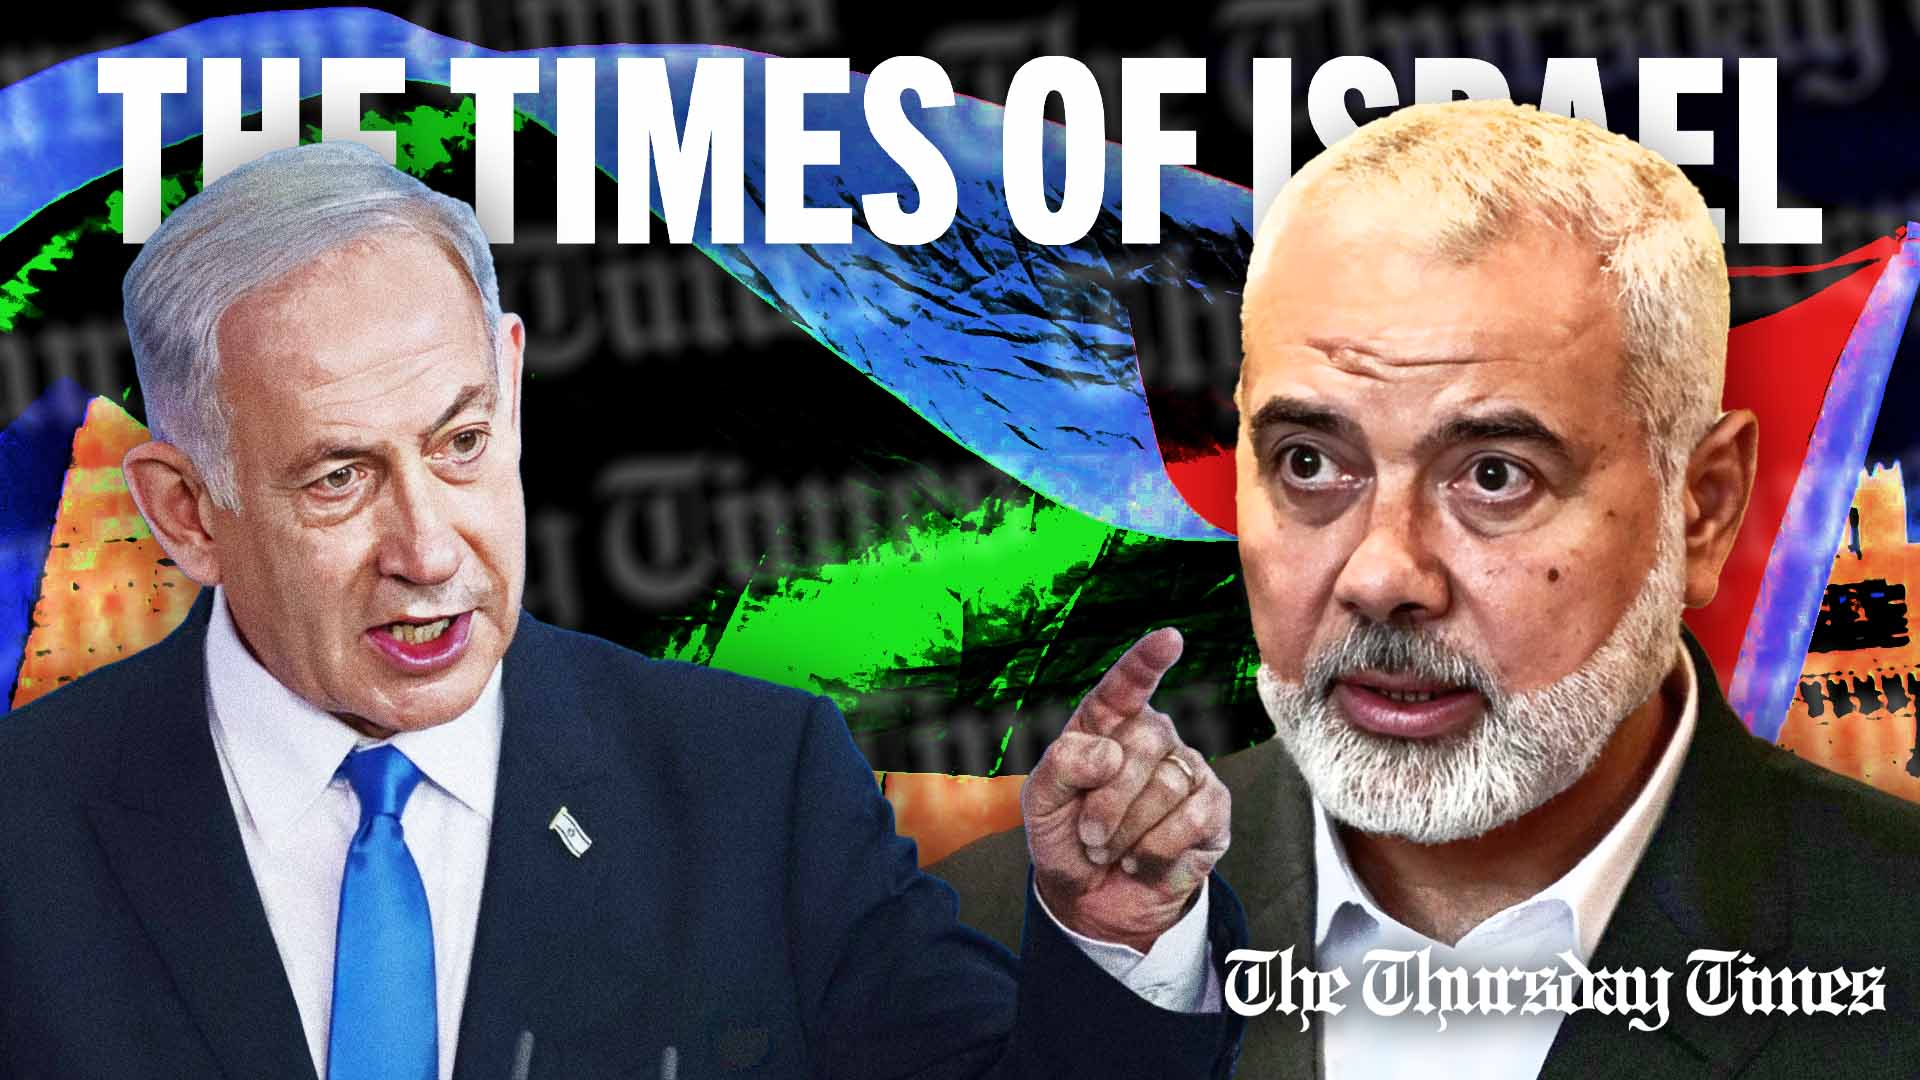 A file photo is shown of Israeli premier Benjamin Netanyahu (L) and Hamas senior leader Ismail Haniyeh (R). — FILE/THE THURSDAY TIMES